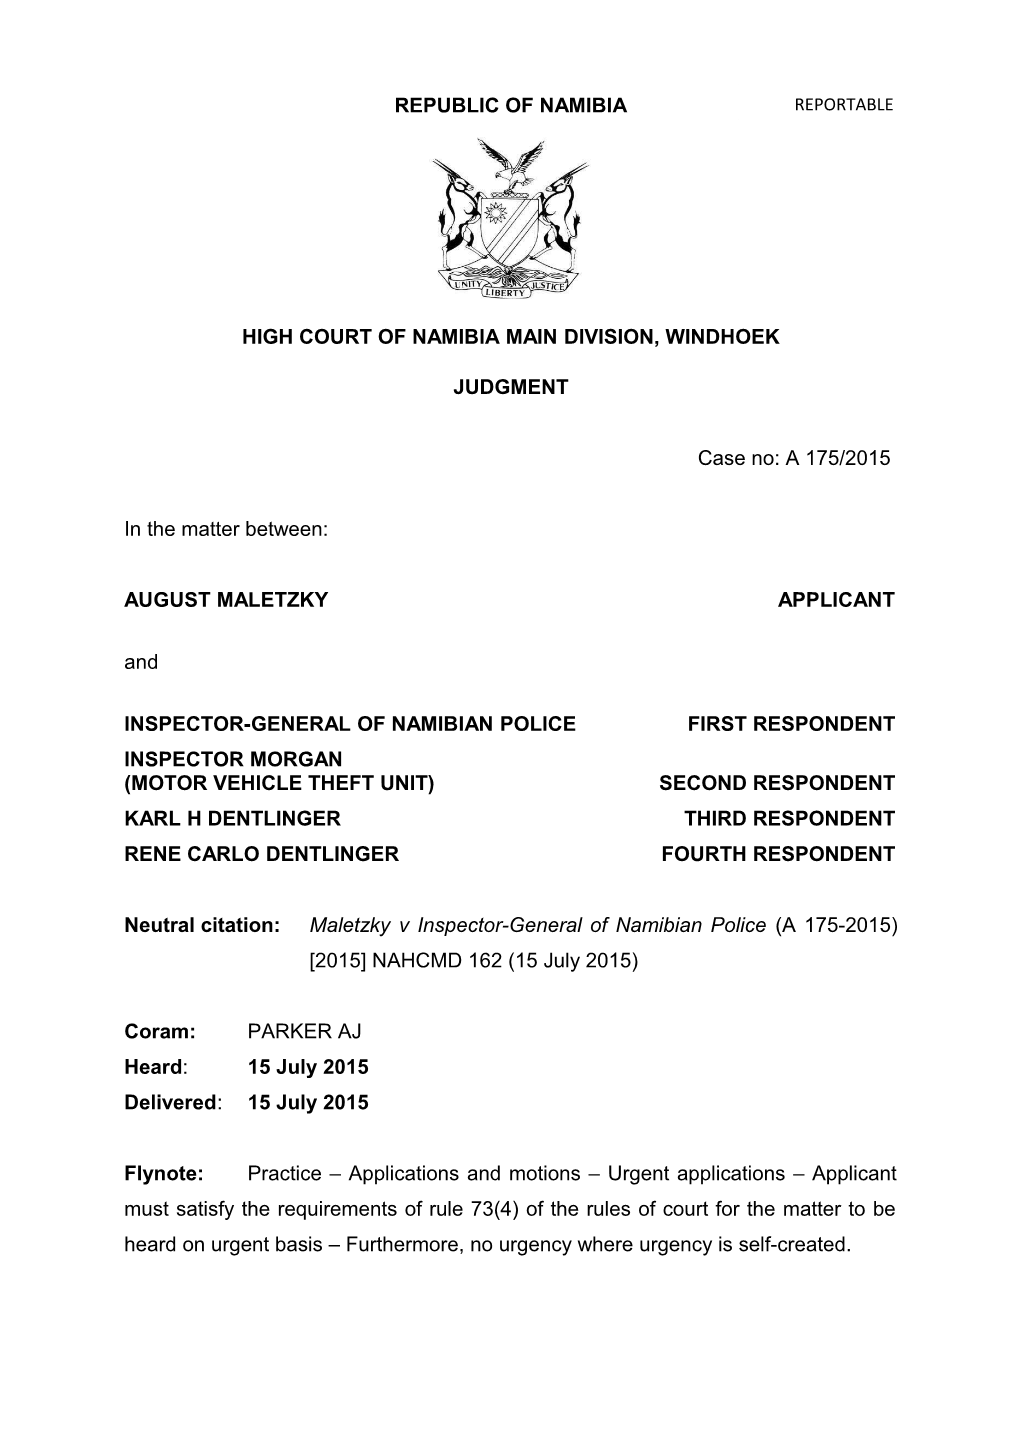 Maletzky V Inspector-General of Namibian Police (A 175-2015) 2015 NAHCMD 162 (15 July 2015)